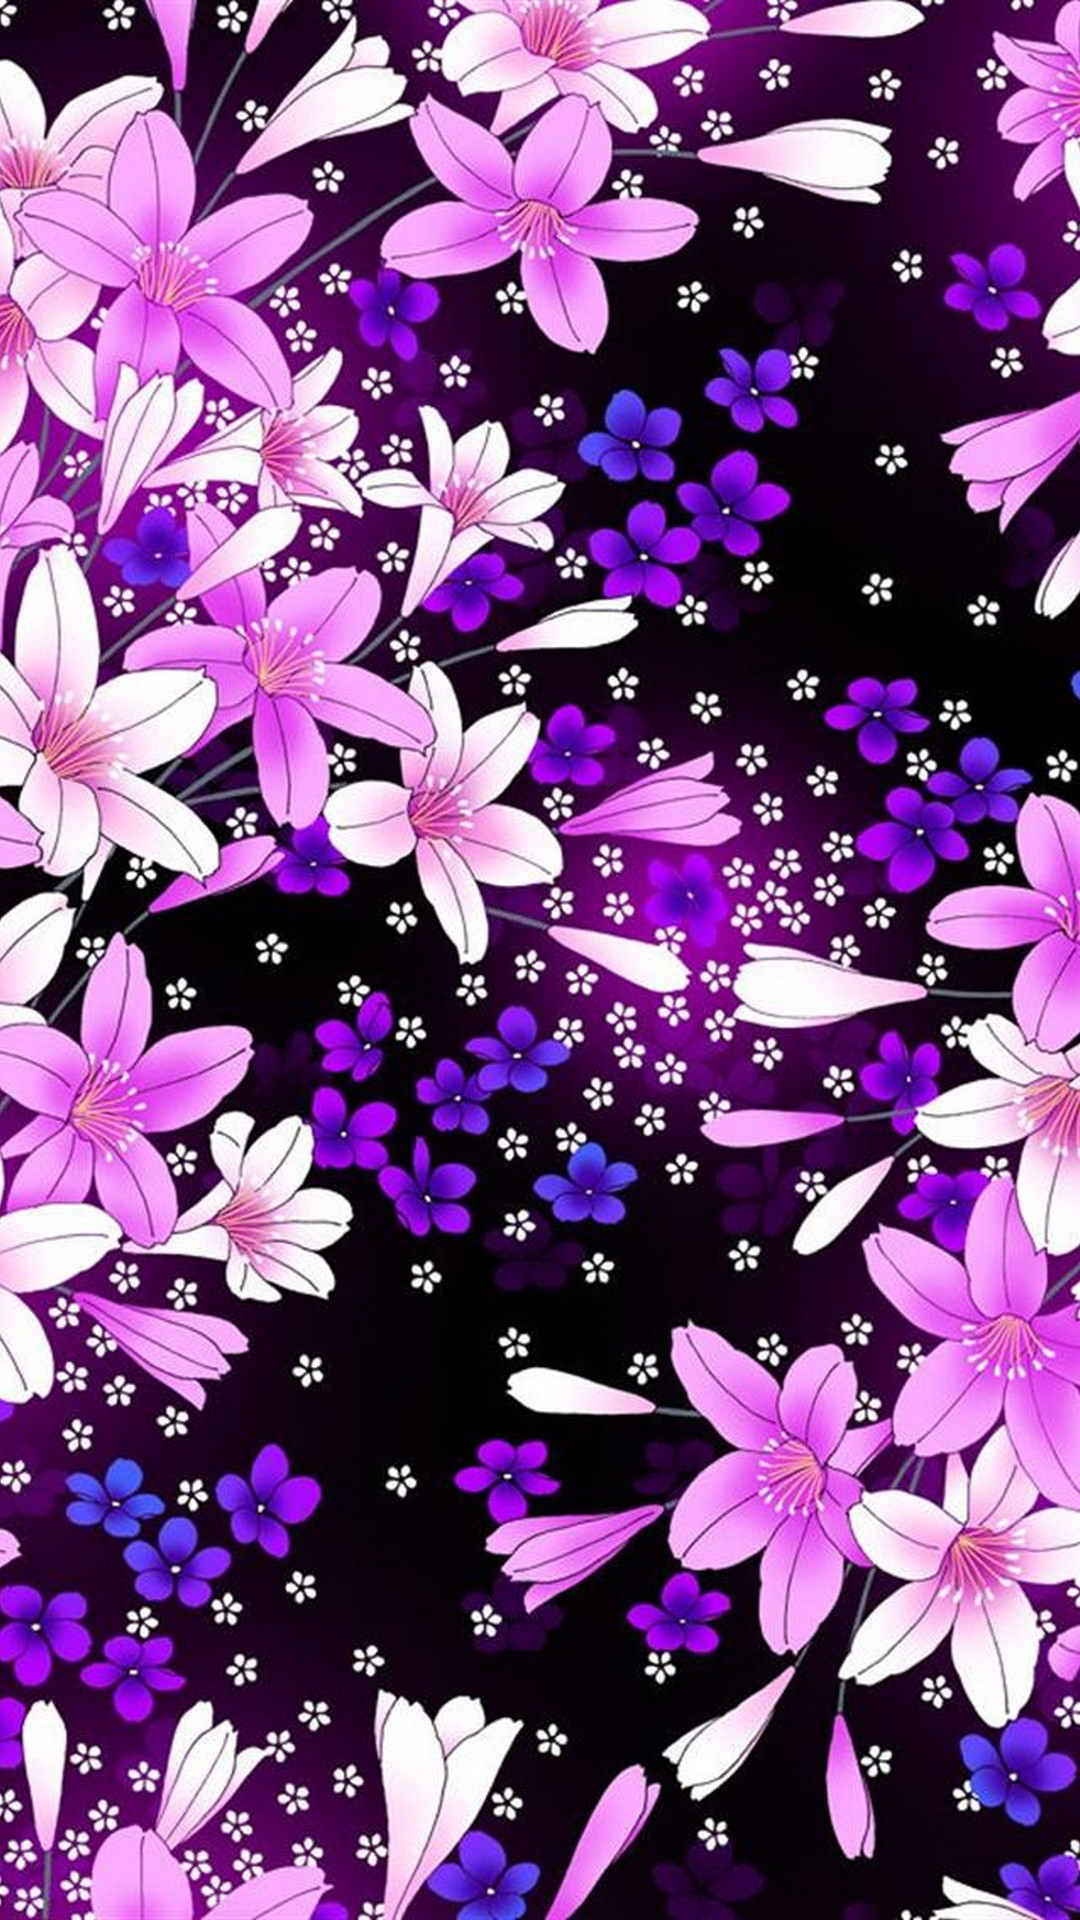 Wallpaper Flowers Purple iPhone With high-resolution 1080X1920 pixel. You can use this wallpaper for your iPhone 5, 6, 7, 8, X, XS, XR backgrounds, Mobile Screensaver, or iPad Lock Screen